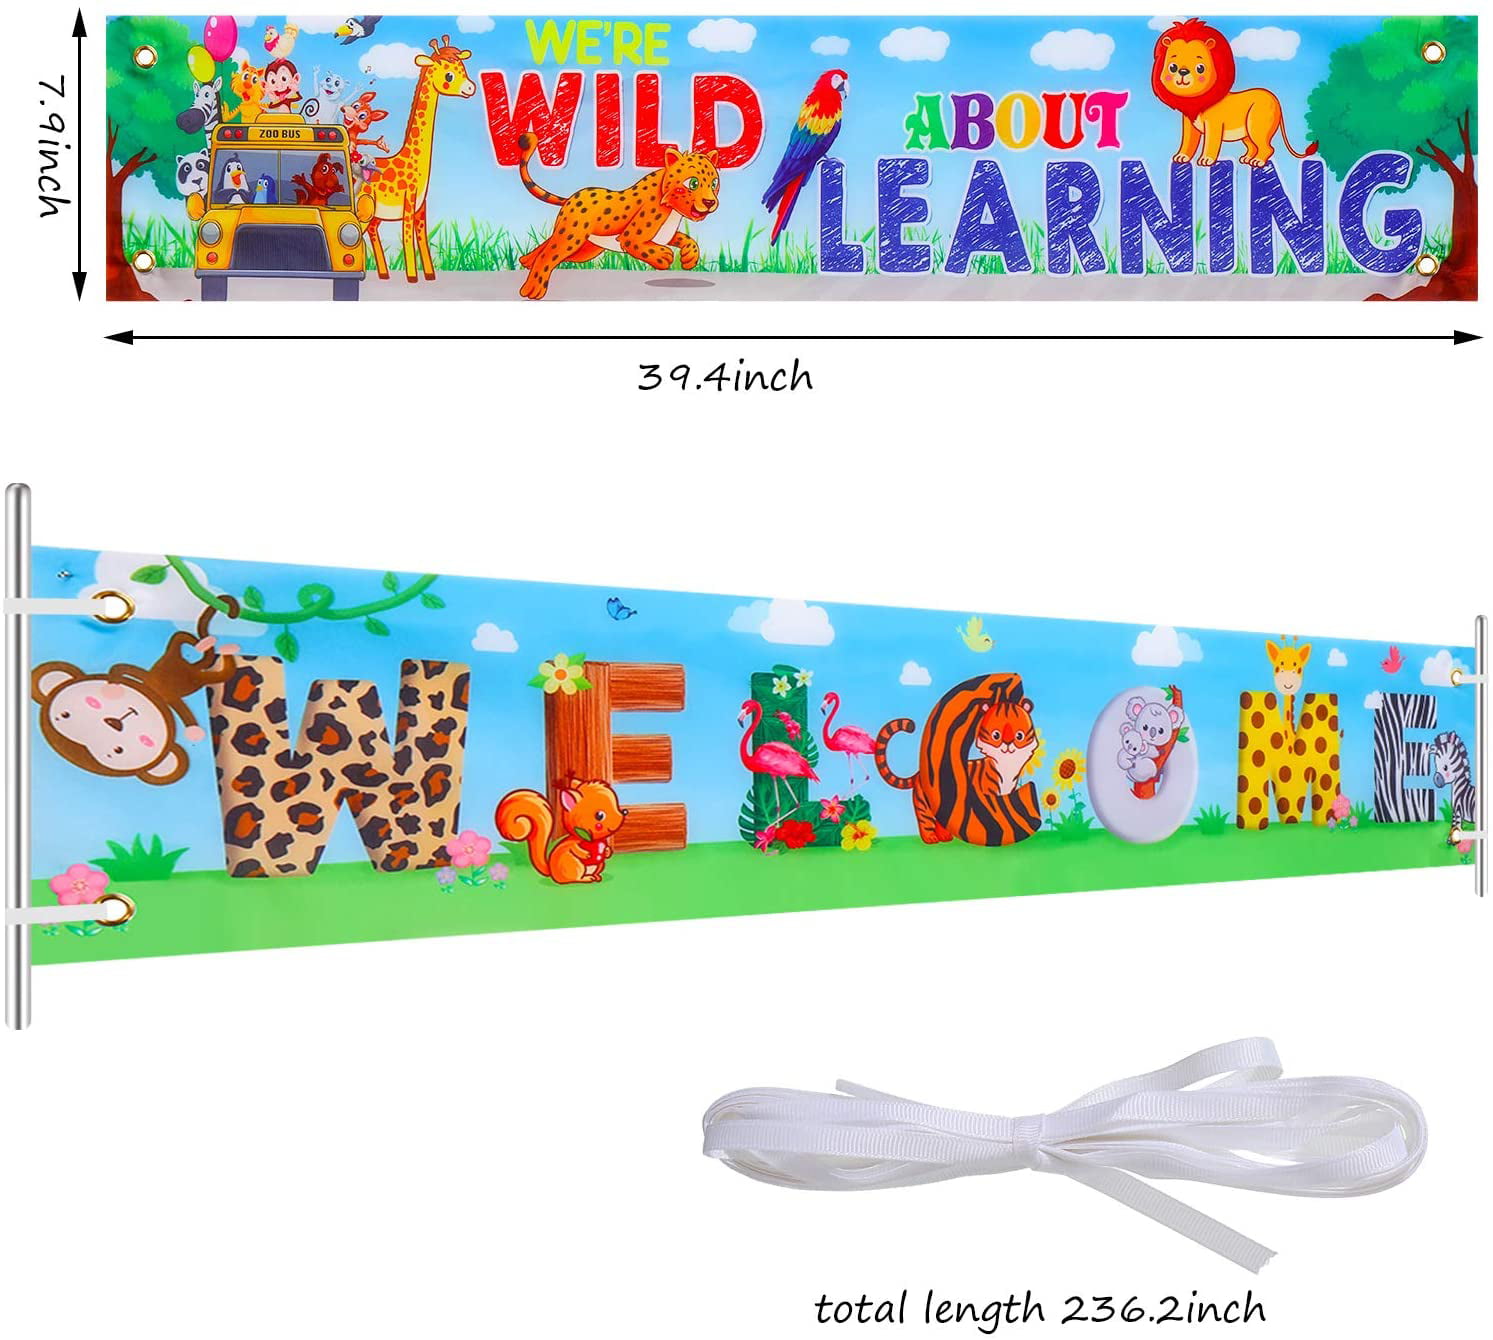 Animal Style 39.4 x 7.9 Inch 2 Pieces Creative Teaching Banner Welcome Back to School Banner with Animal Inspirational Banner Poster Classroom Banner for School Teacher Students Decorations 